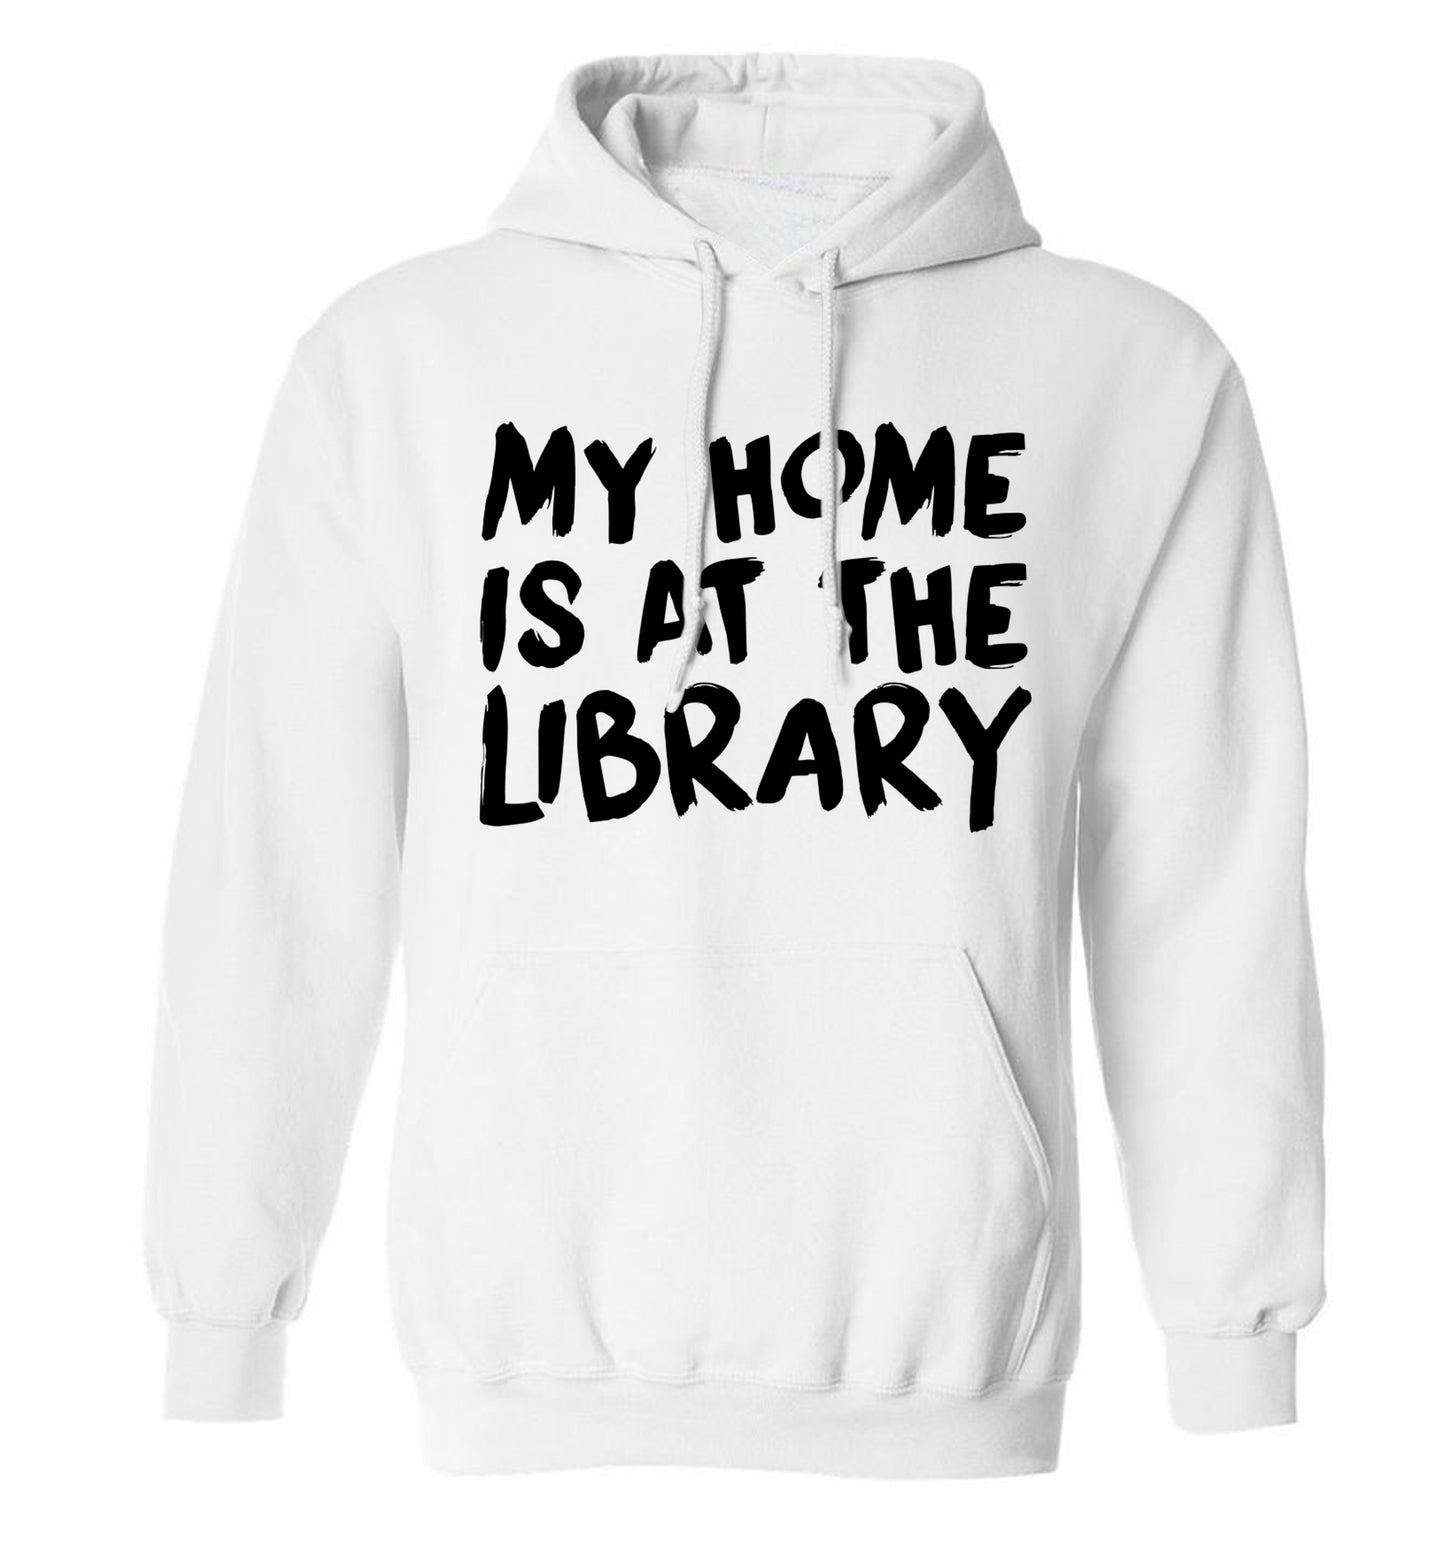 My home is at the library adults unisex white hoodie 2XL